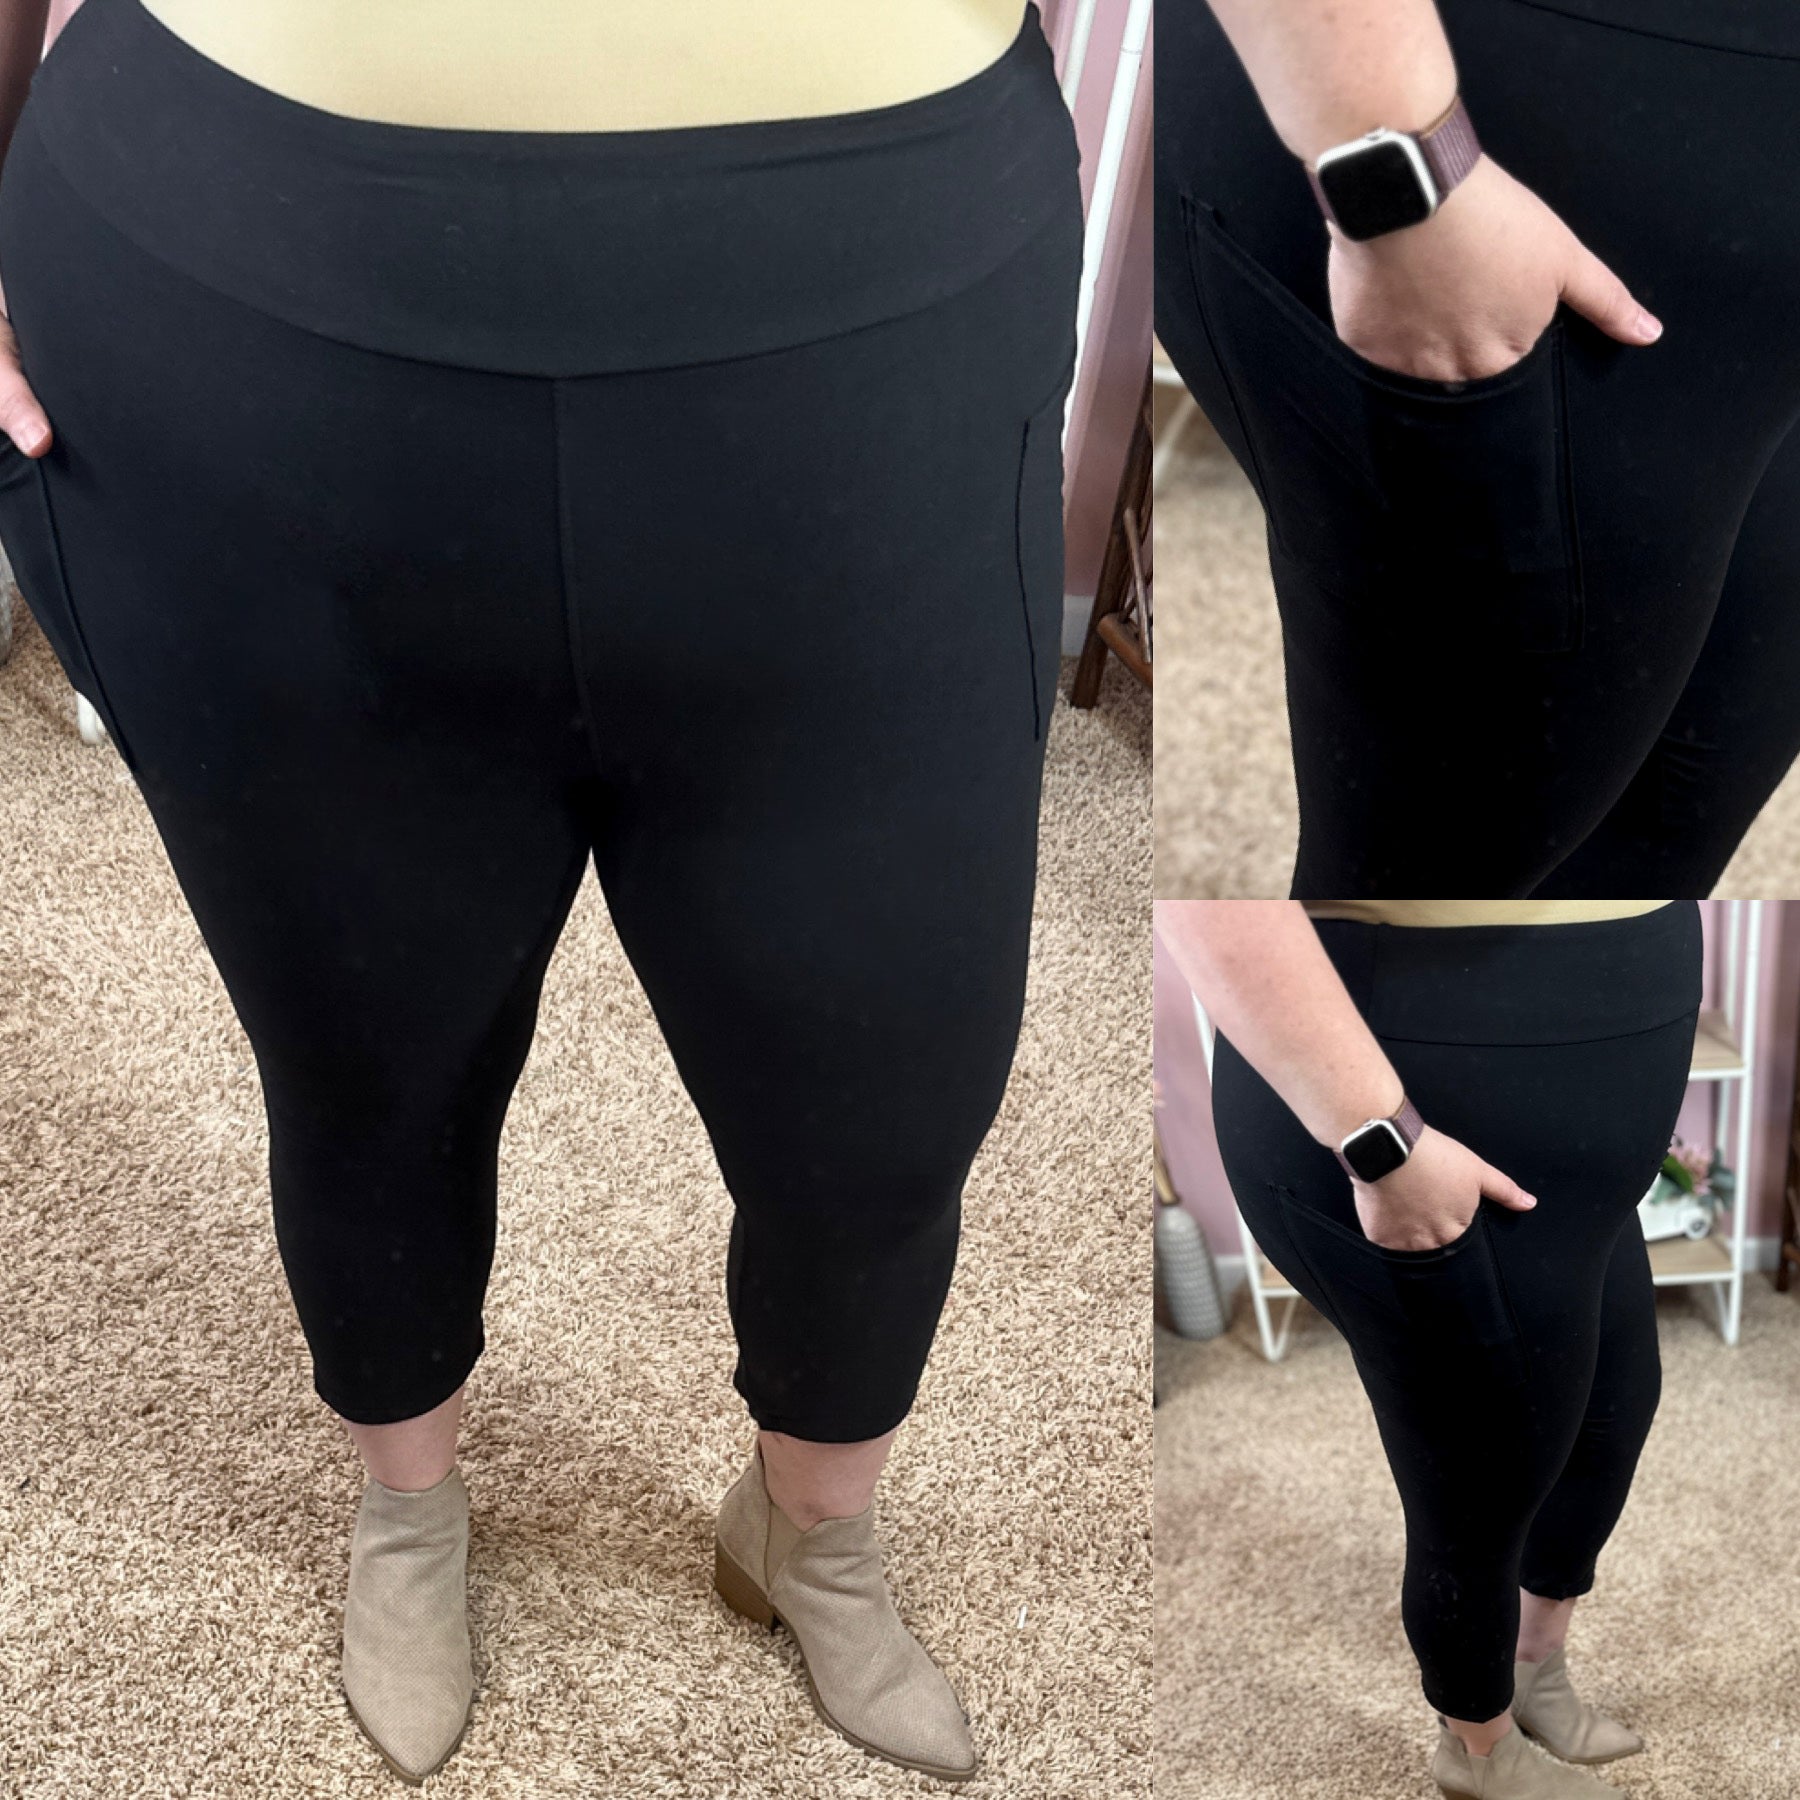 Simply the Best CAPRI Leggings - TC and TC2 Black - Curved and